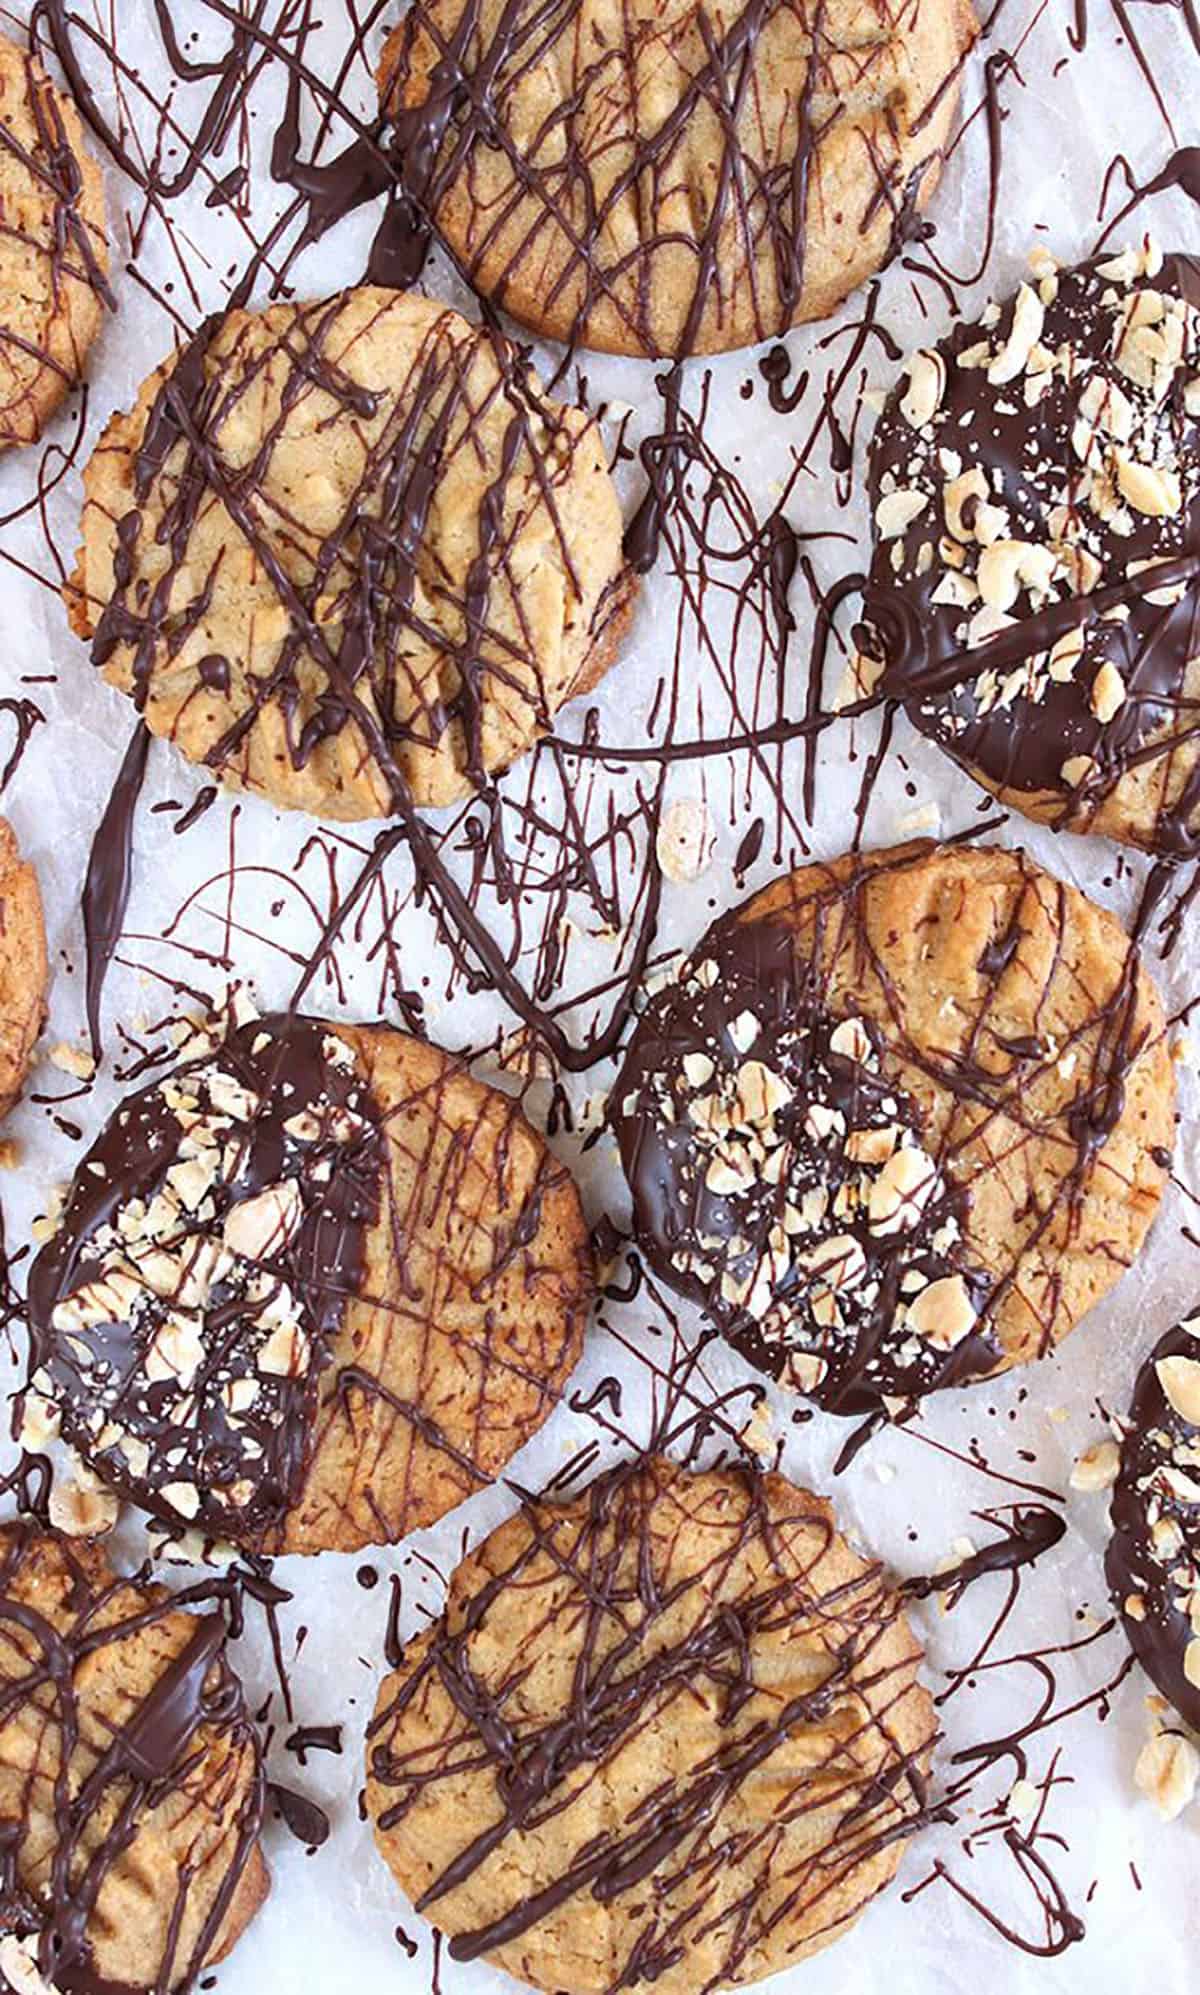 Peanut butter cookies on a sheet of parchment drizzled with chocolate.